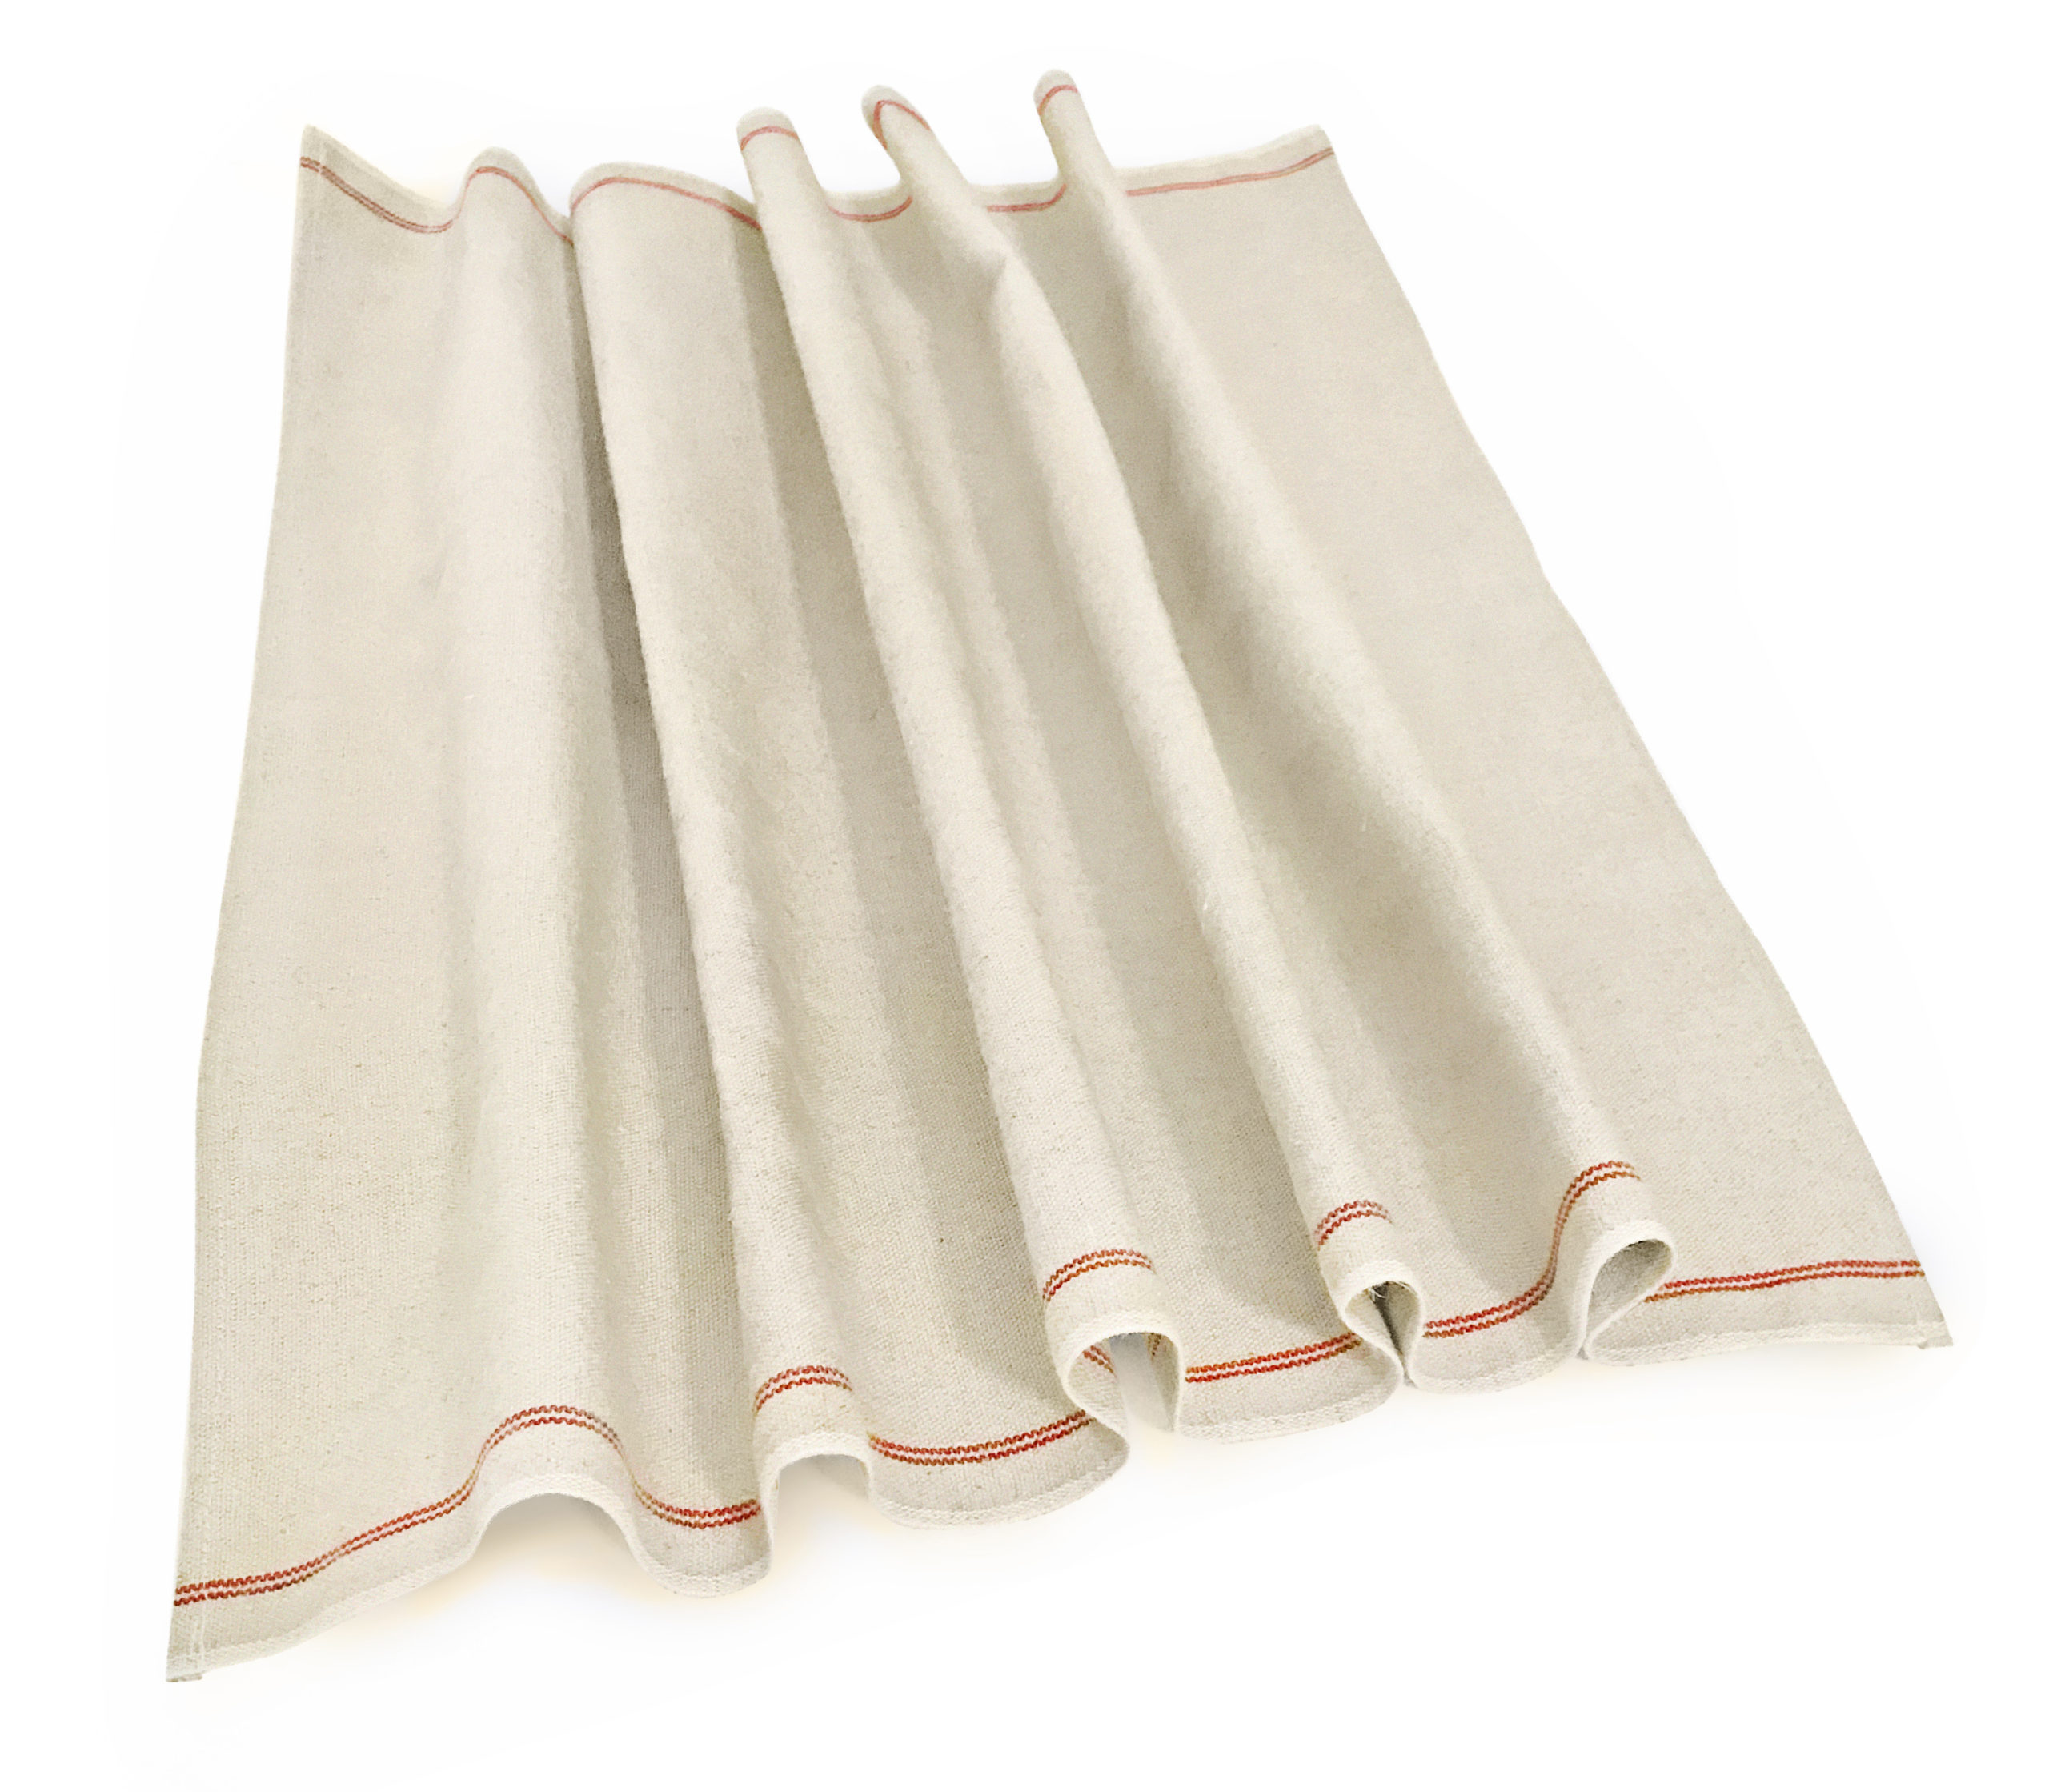 Set of 4 WALFOS Professional Bakers Dough Couches 26x35 Pastry Proofing Cloth 